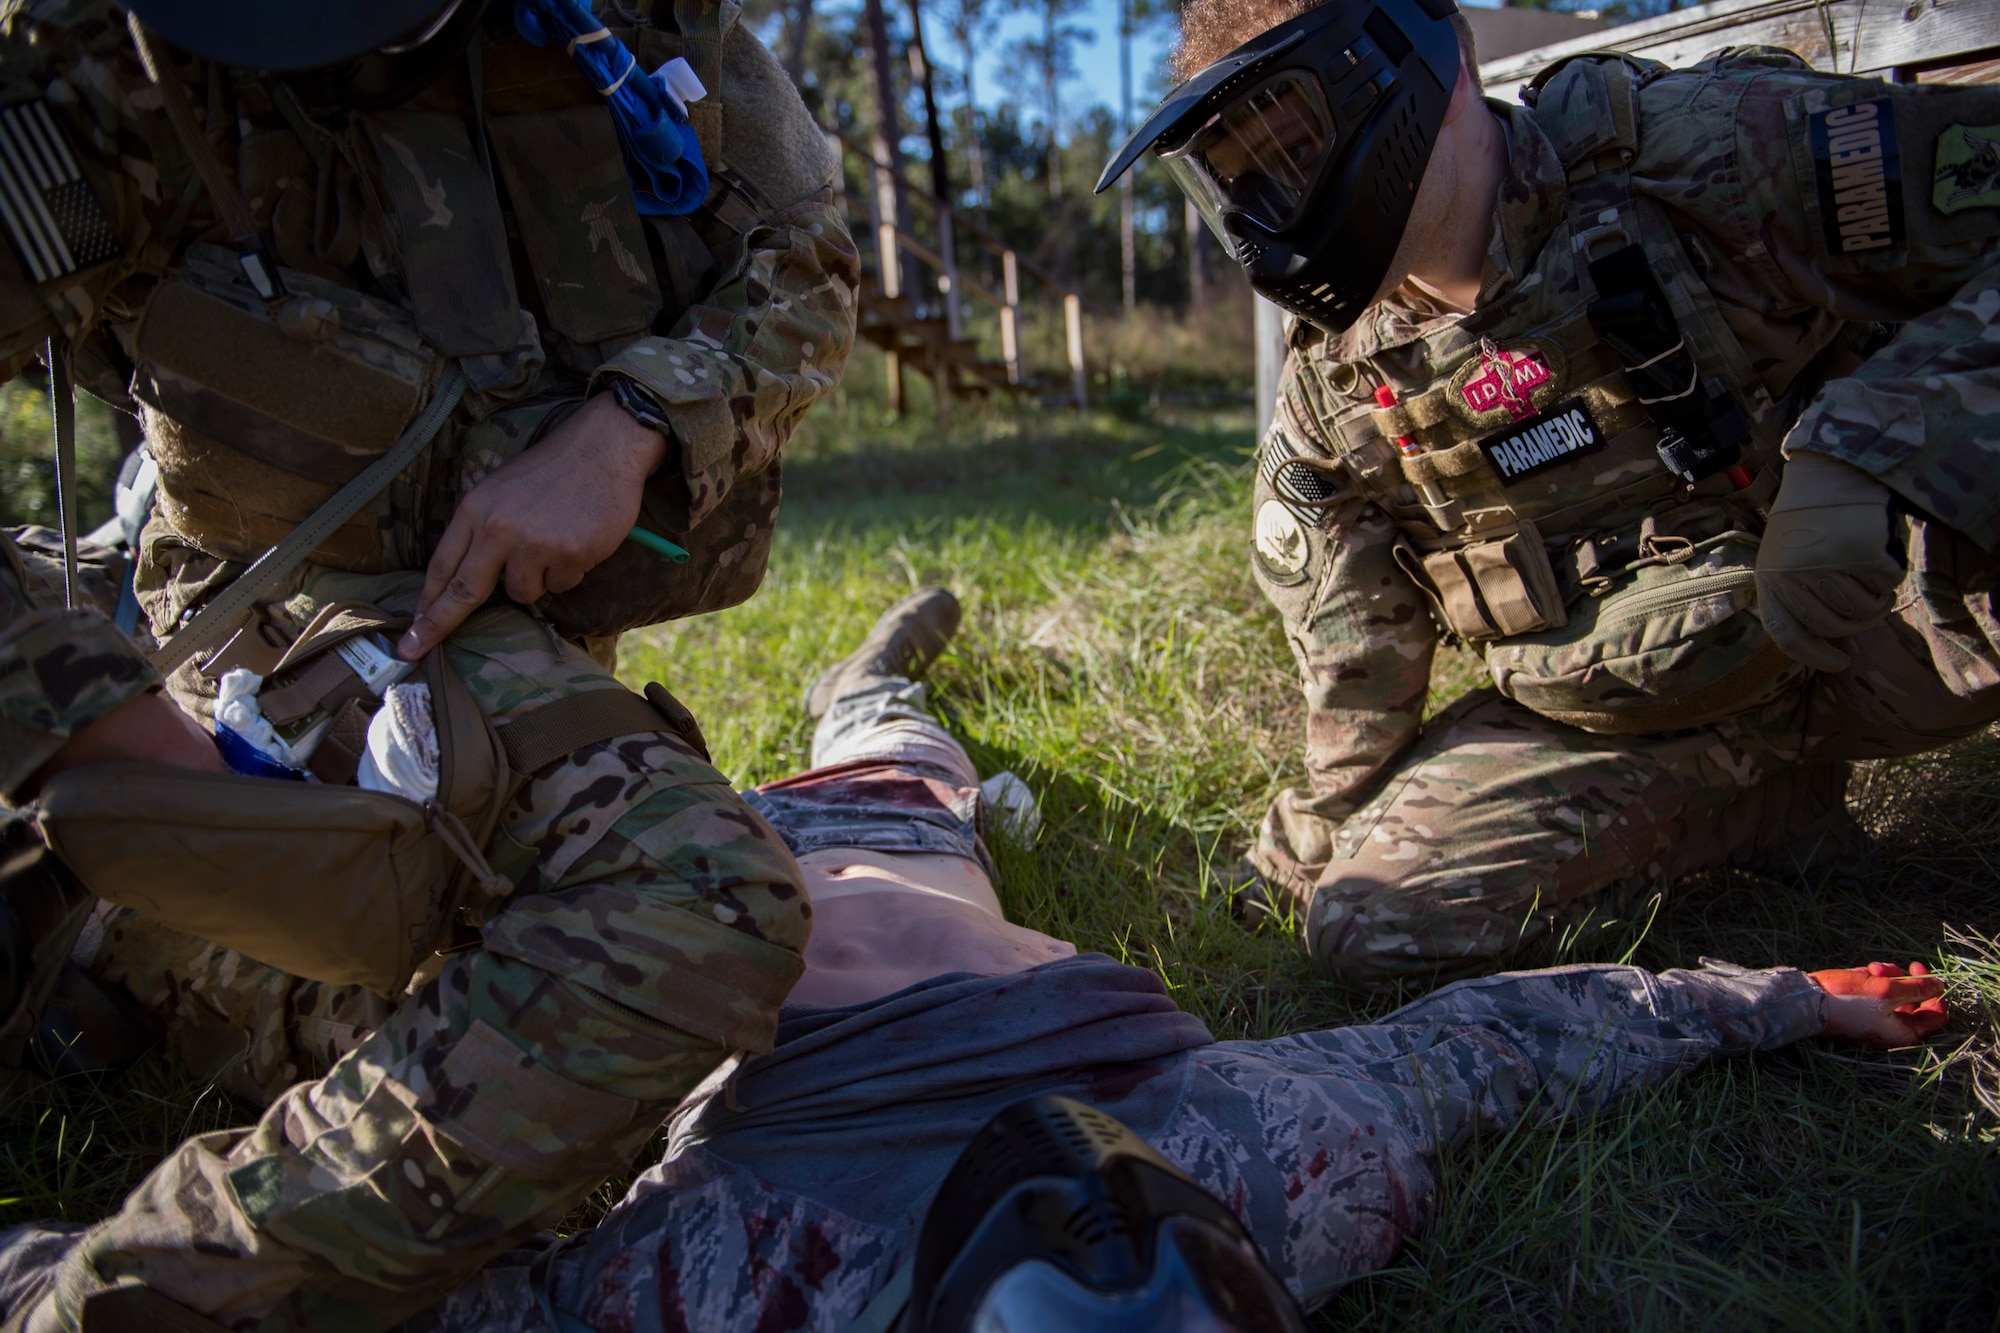 Staff Sgt. Cory Newby, 347th Operations Support Squadron Independent Duty Medical Technician paramedic observes a student applying Tactical Combat Causality Care during training, Oct. 25, 2017, at Moody Air Force Base, Ga. The new, three-day combined training is designed to merge many smaller courses and seamlessly tie together skills that could be used in the event that Airmen become isolated during a mission. (U.S. Air Force photo by Senior Airman Daniel Snider)